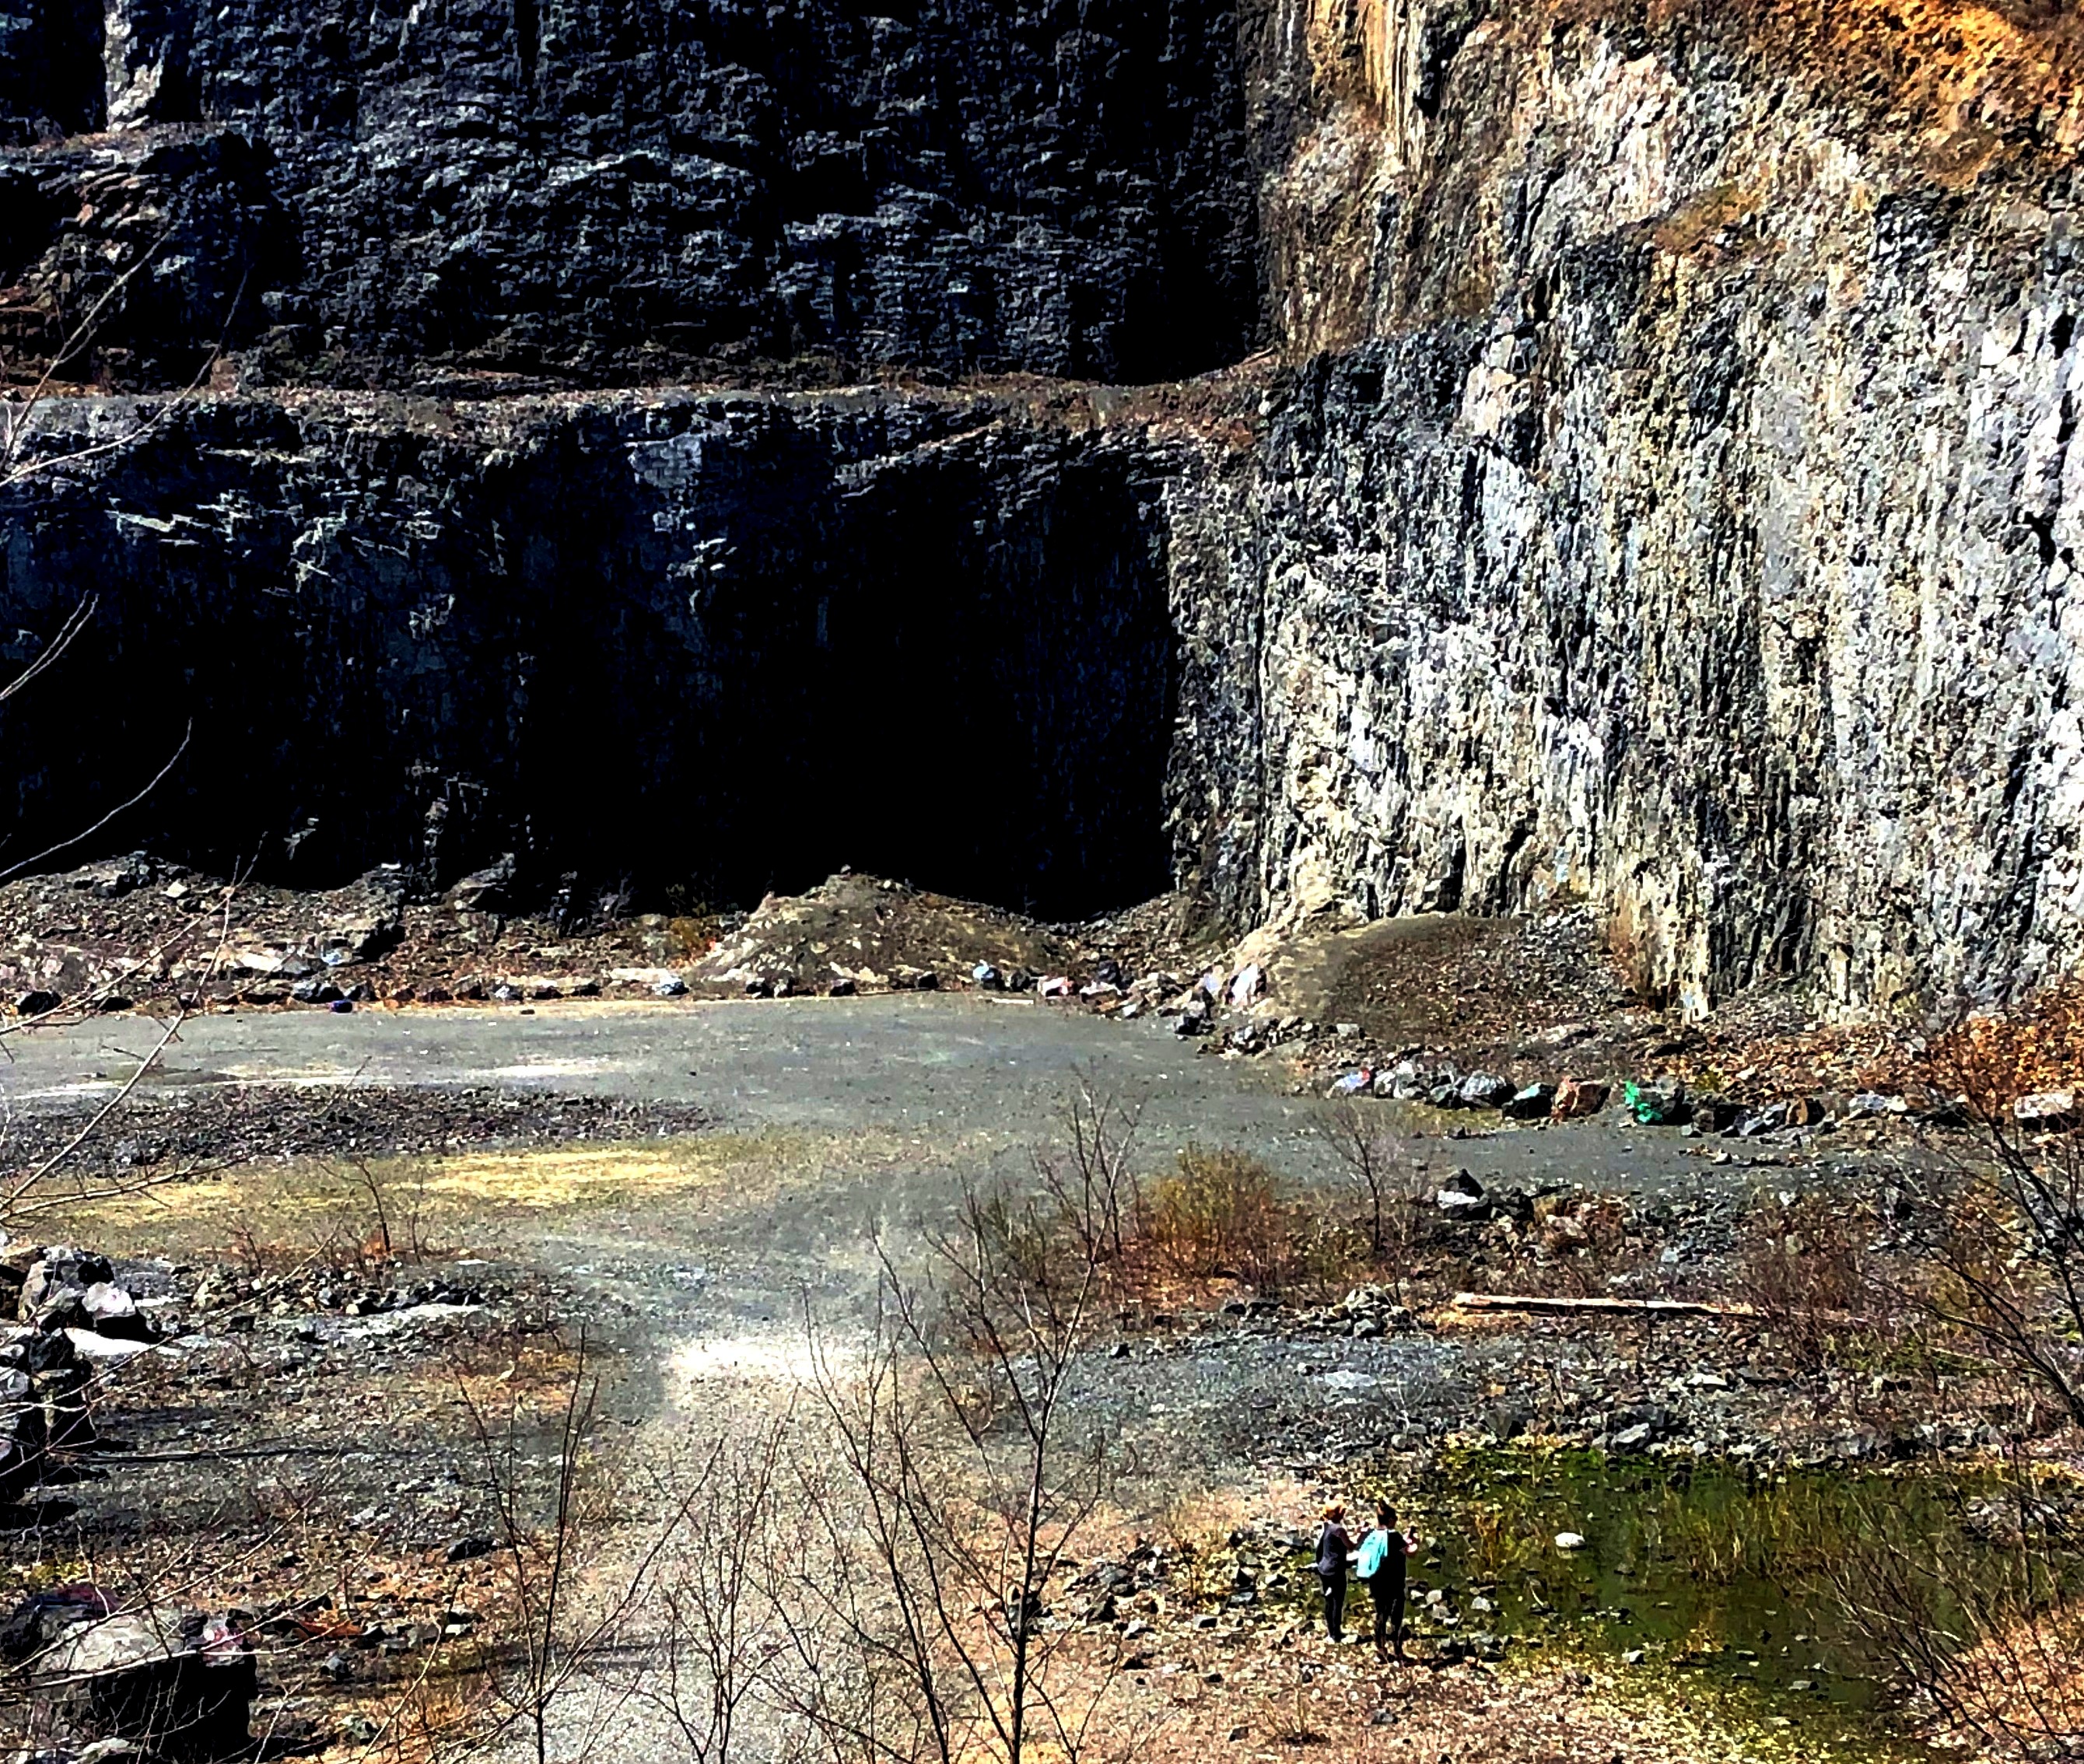 Two hikes stand inside the crater of the former quarry at Mt. Tom.  The state is seeking to acquire the  property and preserve it as a natural habitat.